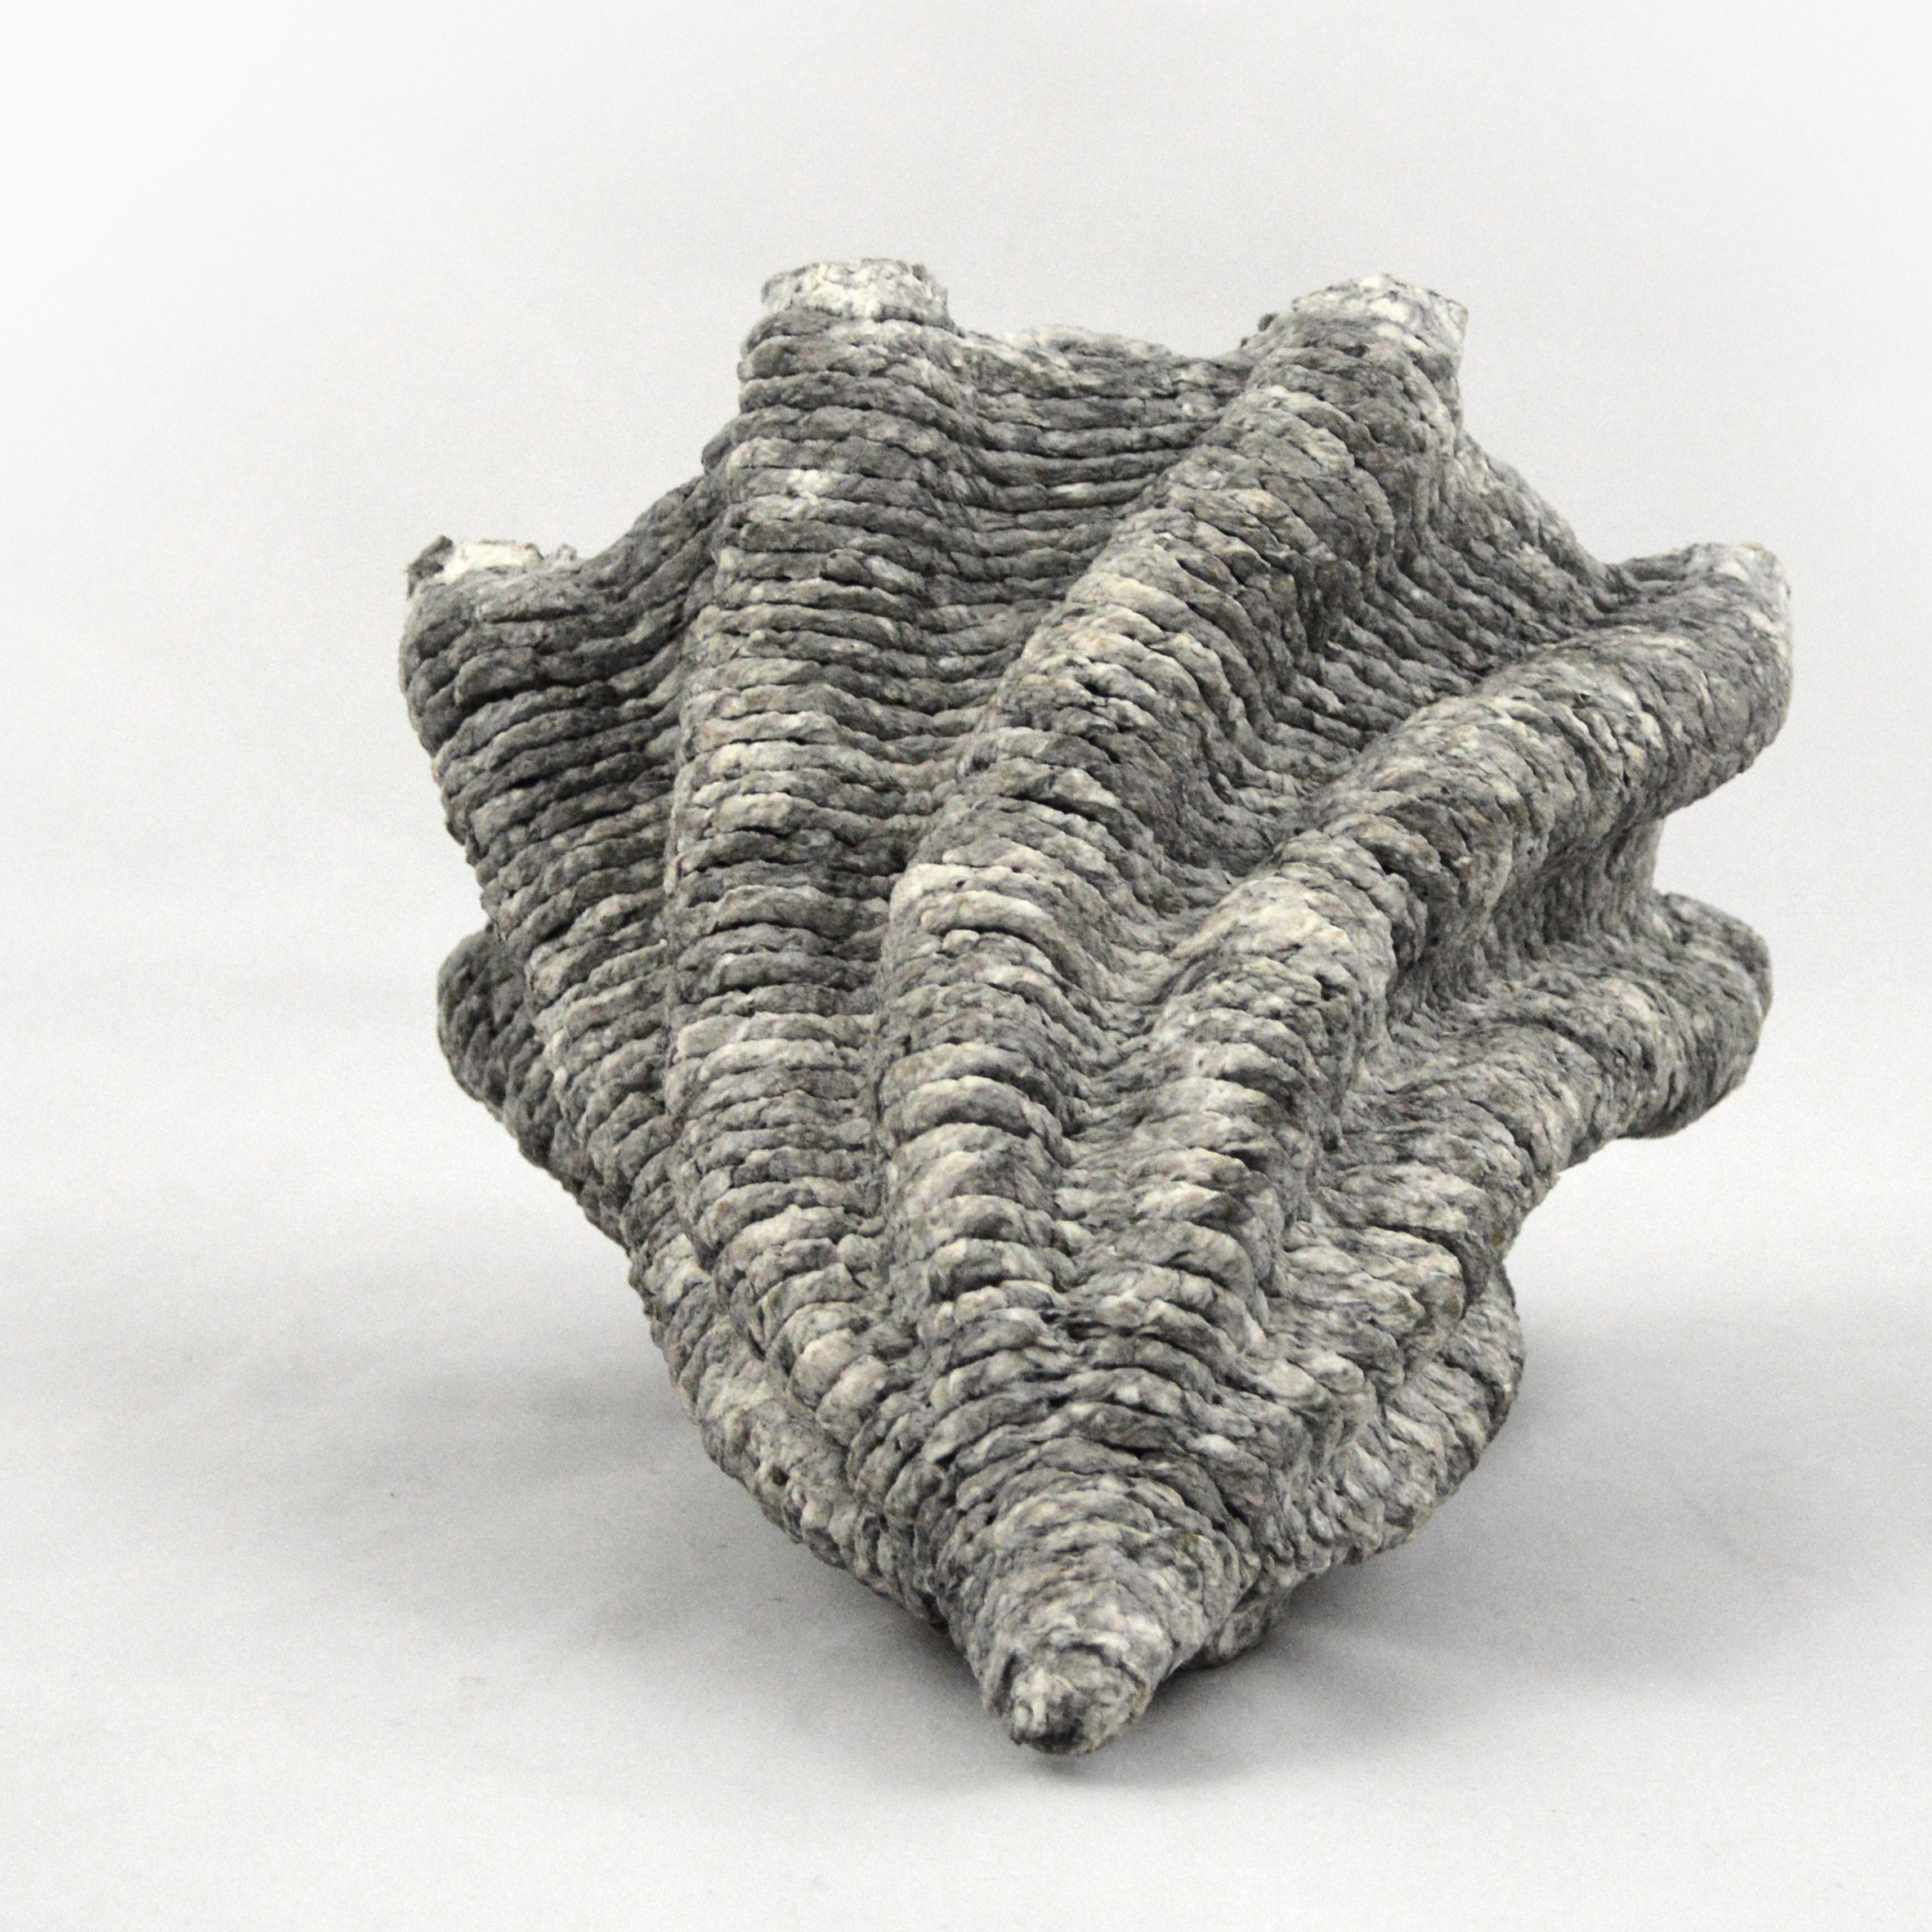 Design Academy Eindhoven graduate designs 3D printer that uses recycled paper